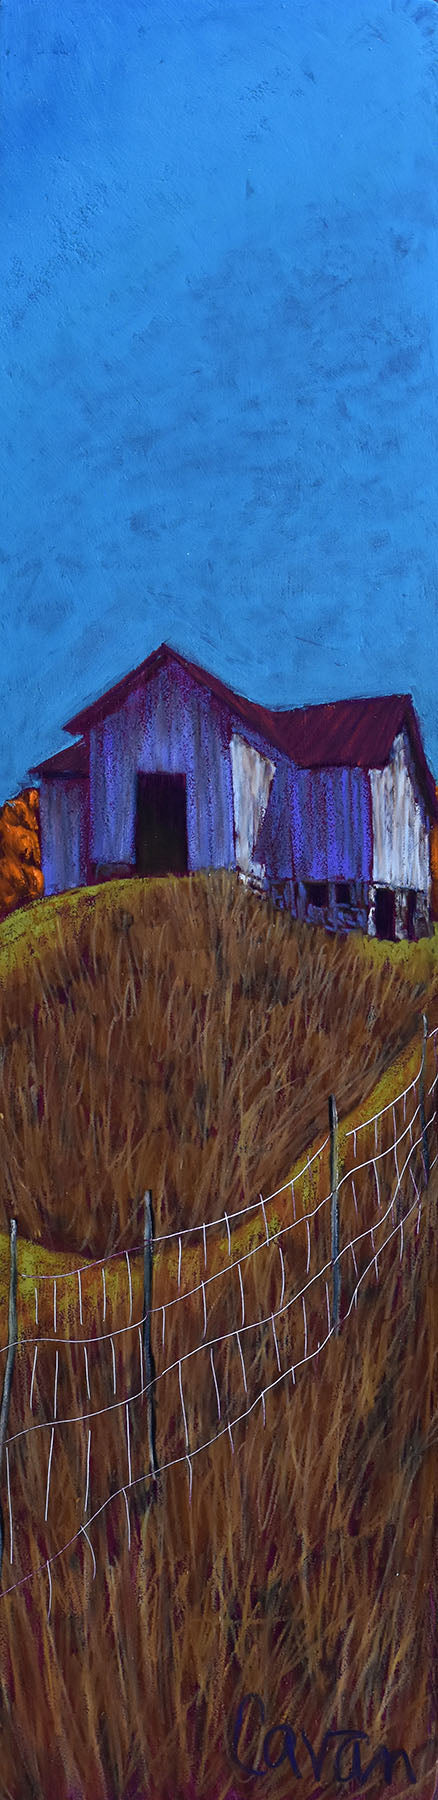 Afternoon Shadows On The Barn | 6” x 24”